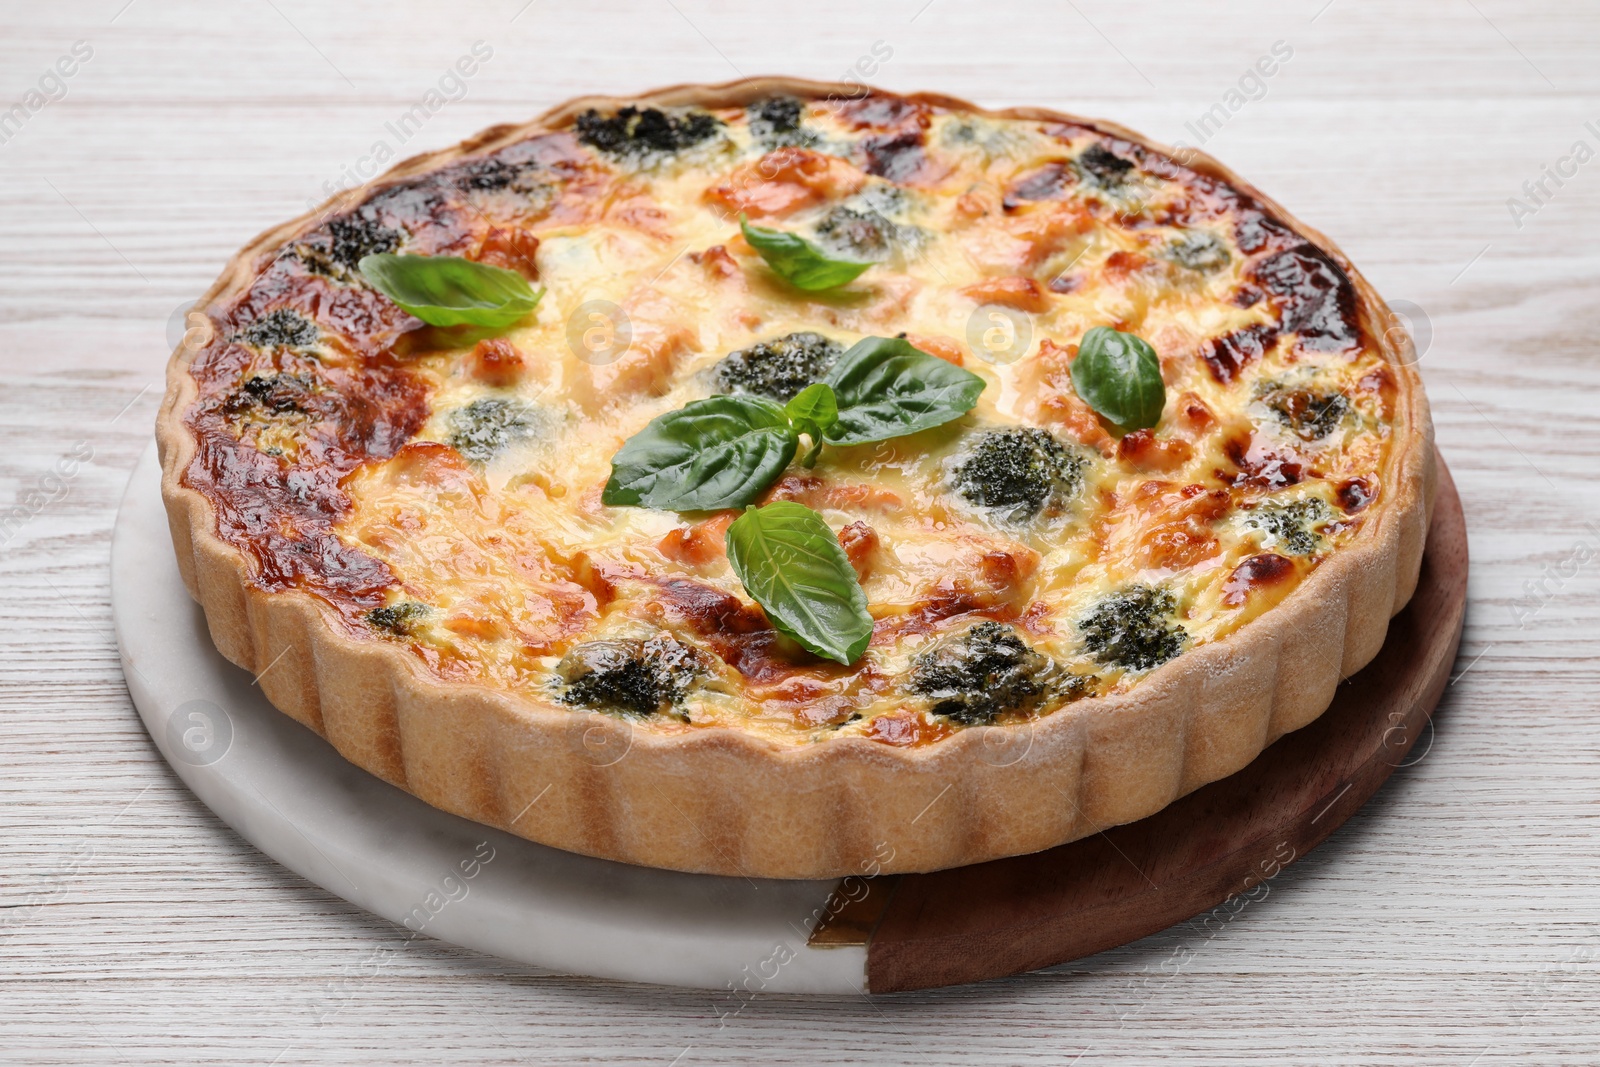 Photo of Delicious homemade quiche with salmon, broccoli and basil leaves on wooden table